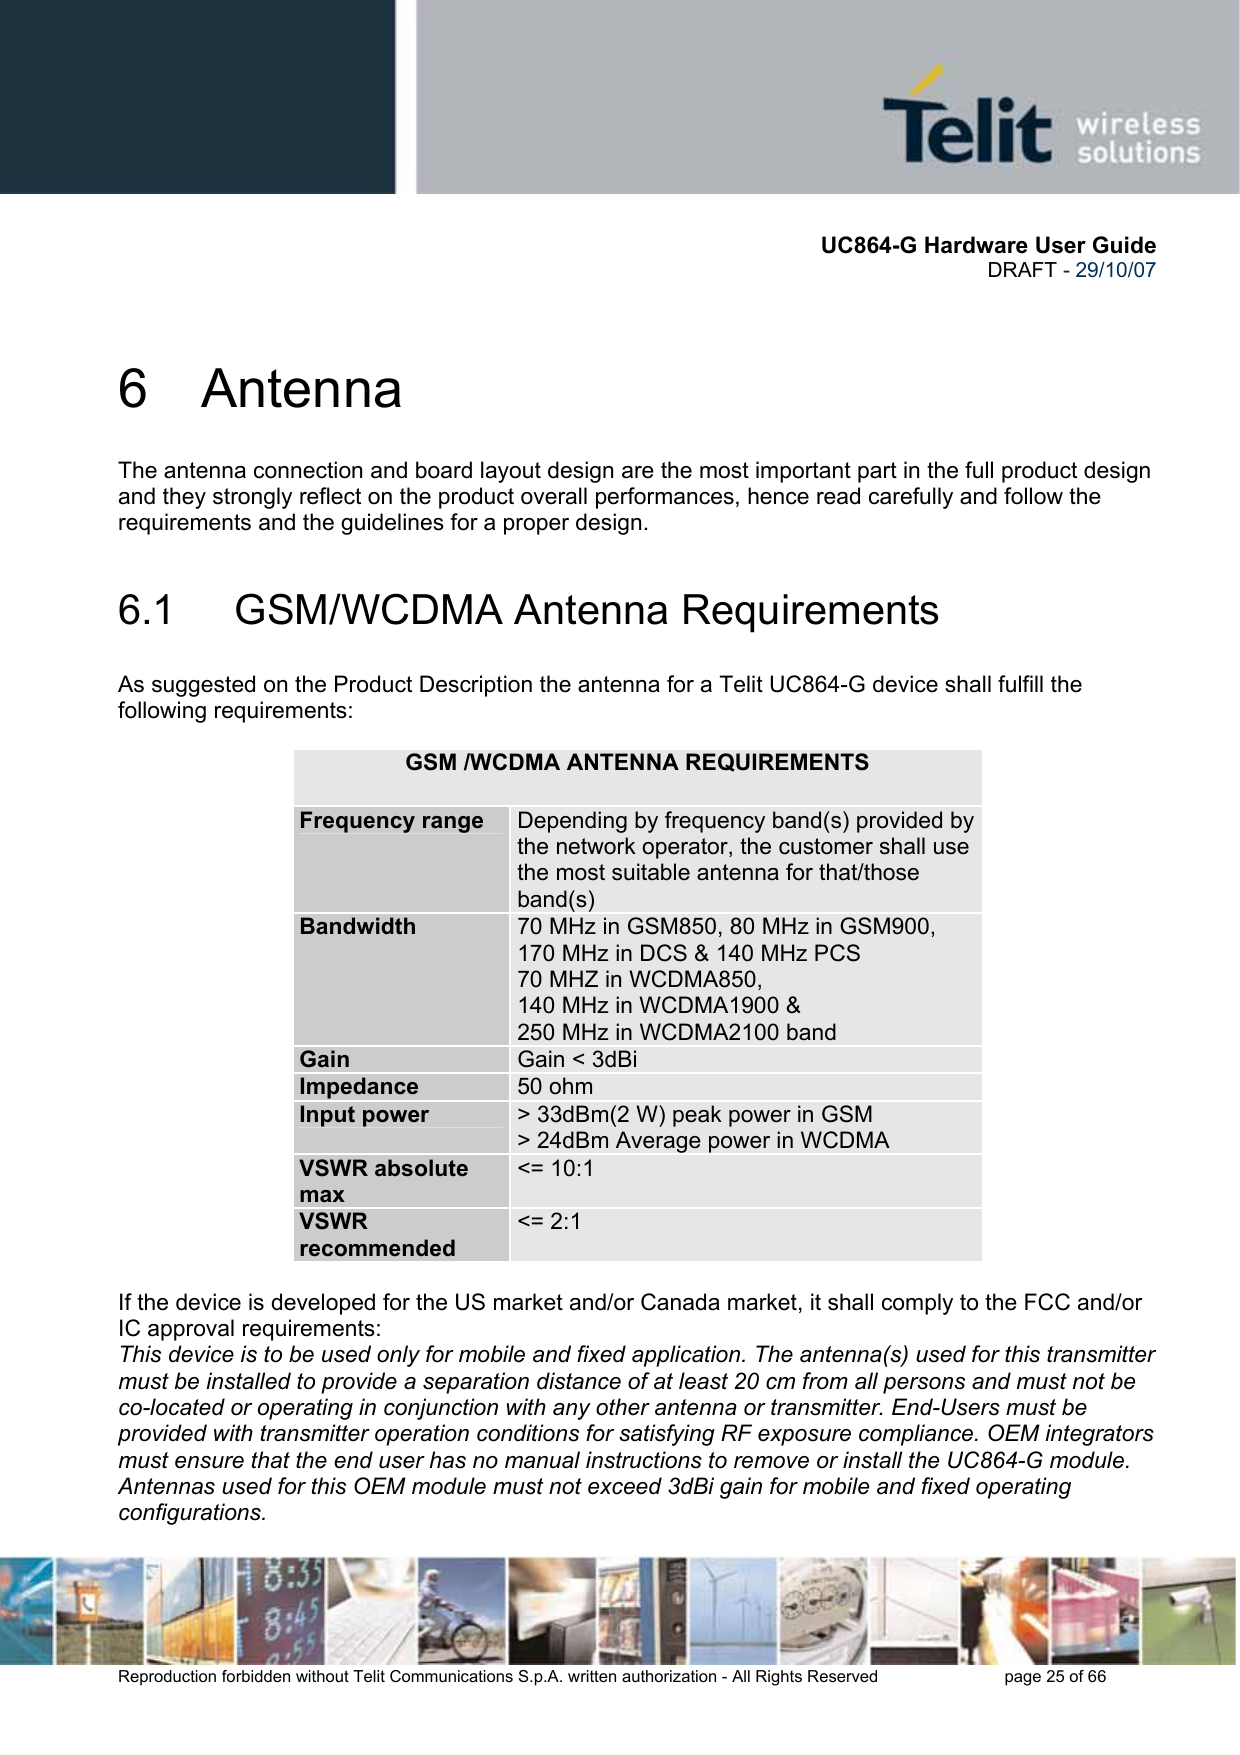       UC864-G Hardware User Guide  DRAFT - 29/10/07      Reproduction forbidden without Telit Communications S.p.A. written authorization - All Rights Reserved    page 25 of 66  6 Antenna The antenna connection and board layout design are the most important part in the full product design and they strongly reflect on the product overall performances, hence read carefully and follow the requirements and the guidelines for a proper design. 6.1   GSM/WCDMA Antenna Requirements As suggested on the Product Description the antenna for a Telit UC864-G device shall fulfill the following requirements:     If the device is developed for the US market and/or Canada market, it shall comply to the FCC and/or IC approval requirements: This device is to be used only for mobile and fixed application. The antenna(s) used for this transmitter must be installed to provide a separation distance of at least 20 cm from all persons and must not be co-located or operating in conjunction with any other antenna or transmitter. End-Users must be provided with transmitter operation conditions for satisfying RF exposure compliance. OEM integrators must ensure that the end user has no manual instructions to remove or install the UC864-G module. Antennas used for this OEM module must not exceed 3dBi gain for mobile and fixed operating configurations. GSM /WCDMA ANTENNA REQUIREMENTS Frequency range  Depending by frequency band(s) provided by the network operator, the customer shall use the most suitable antenna for that/those band(s) Bandwidth  70 MHz in GSM850, 80 MHz in GSM900, 170 MHz in DCS &amp; 140 MHz PCS 70 MHZ in WCDMA850, 140 MHz in WCDMA1900 &amp; 250 MHz in WCDMA2100 band Gain  Gain &lt; 3dBi Impedance  50 ohm Input power  &gt; 33dBm(2 W) peak power in GSM &gt; 24dBm Average power in WCDMA VSWR absolute max &lt;= 10:1 VSWR recommended &lt;= 2:1 